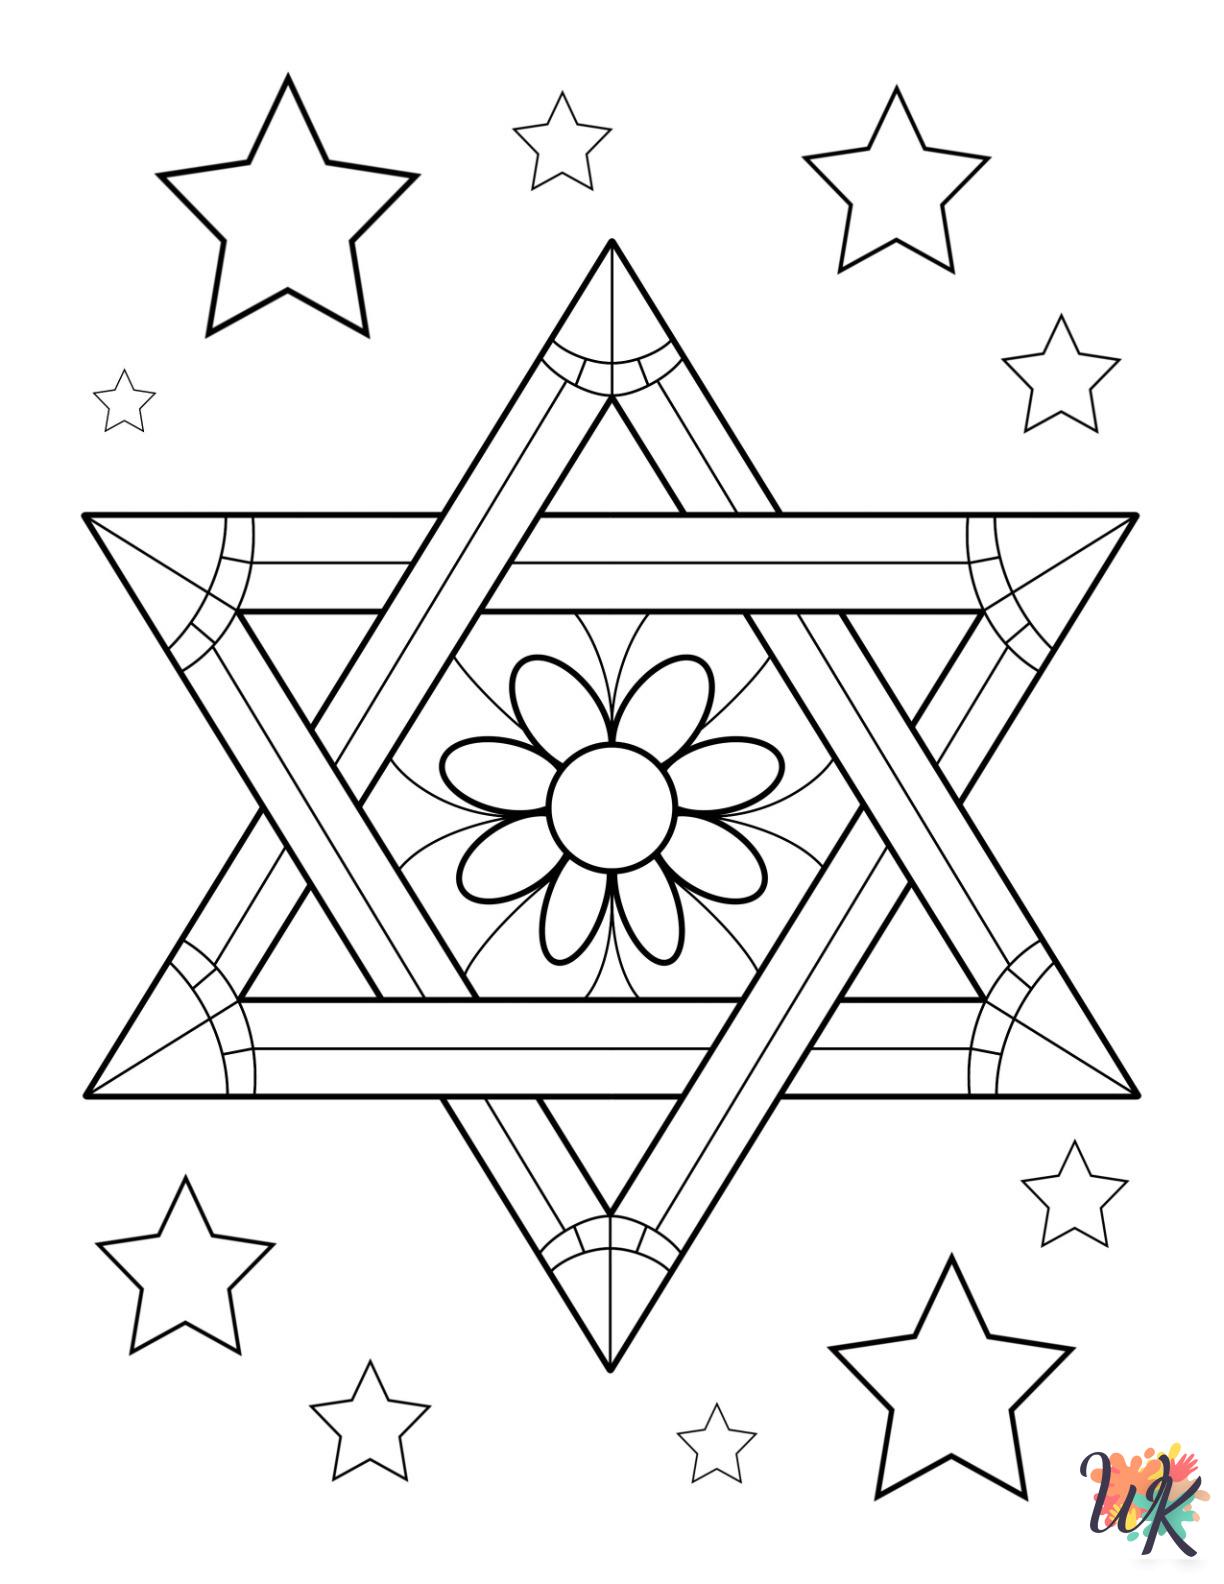 Hanukkah themed coloring pages